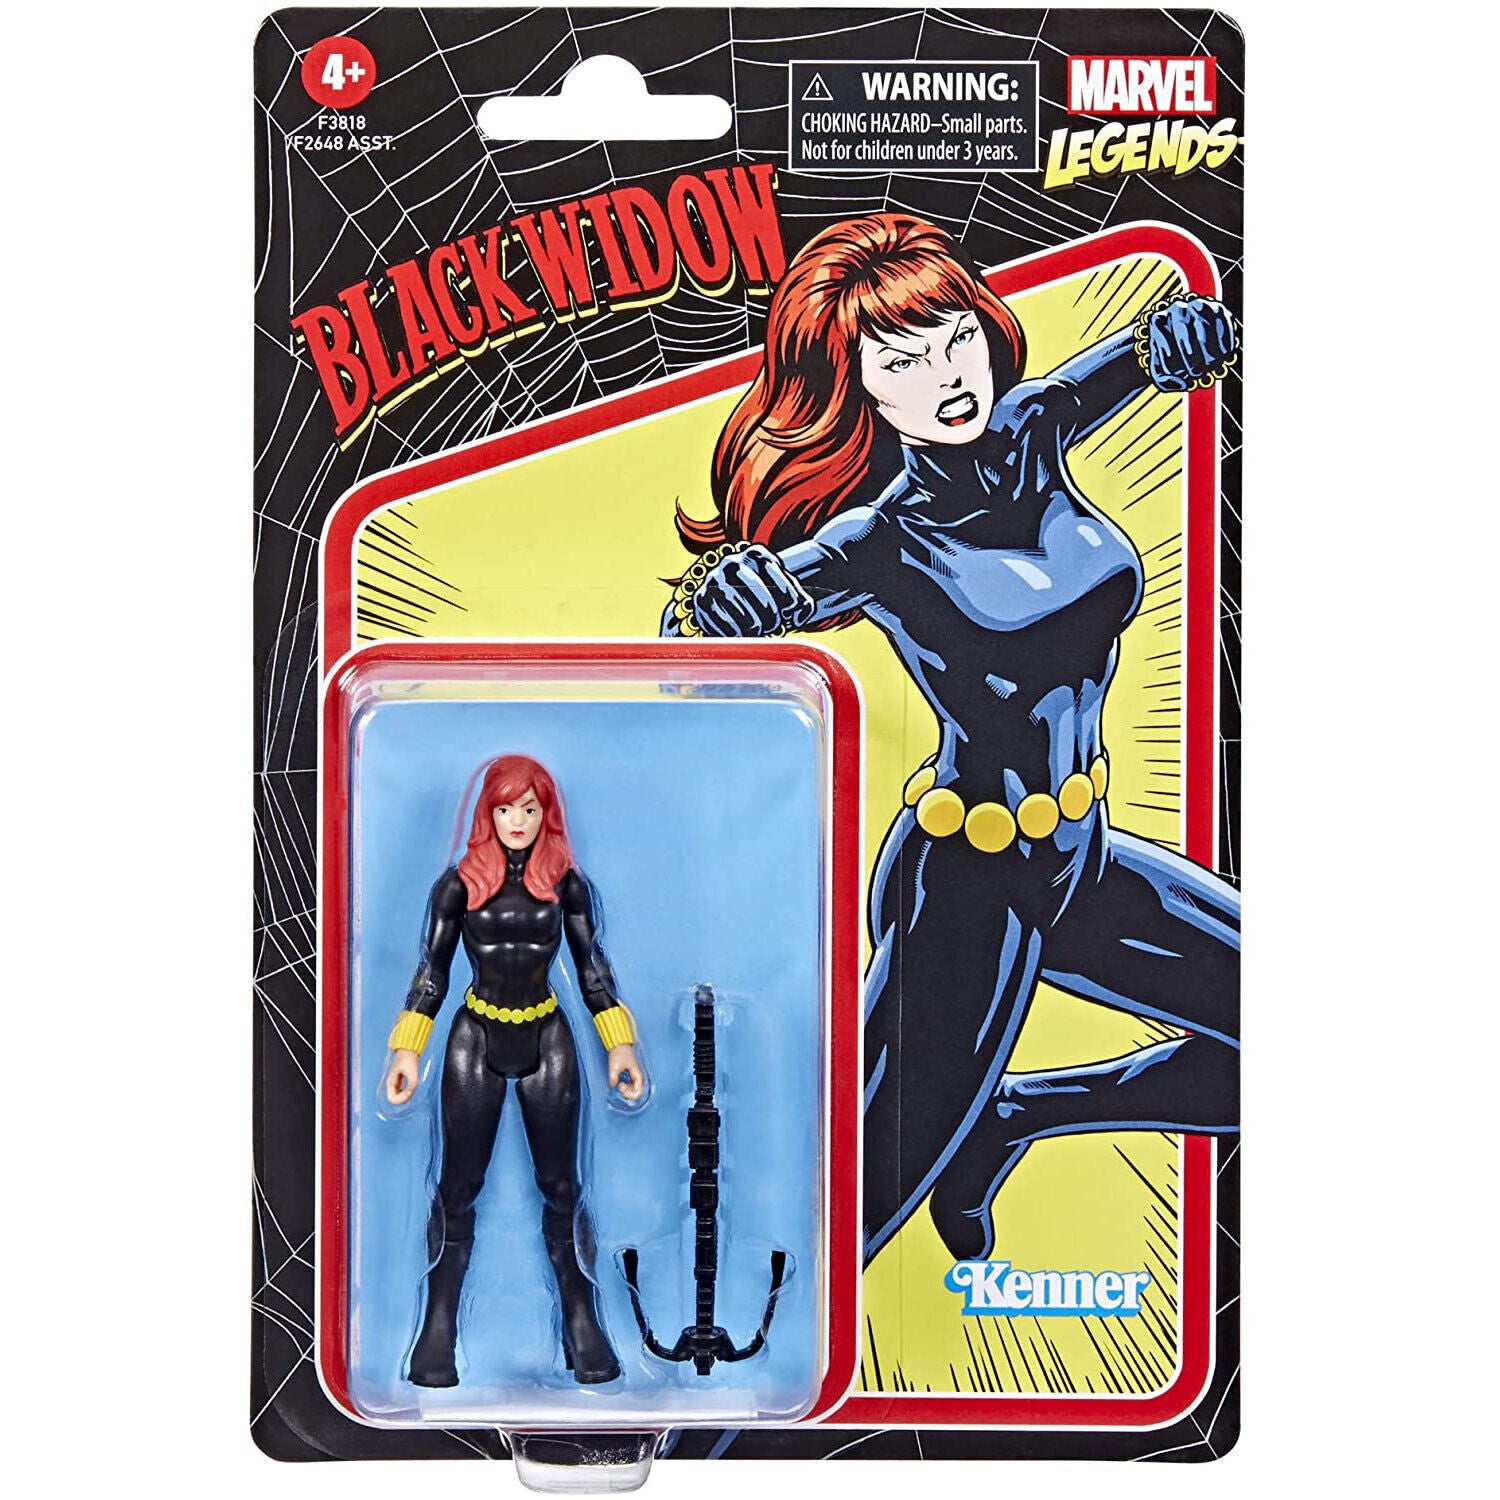 New Marvel Legends Retro Black Widow 3.75-Inch Figure - Collectible Toy